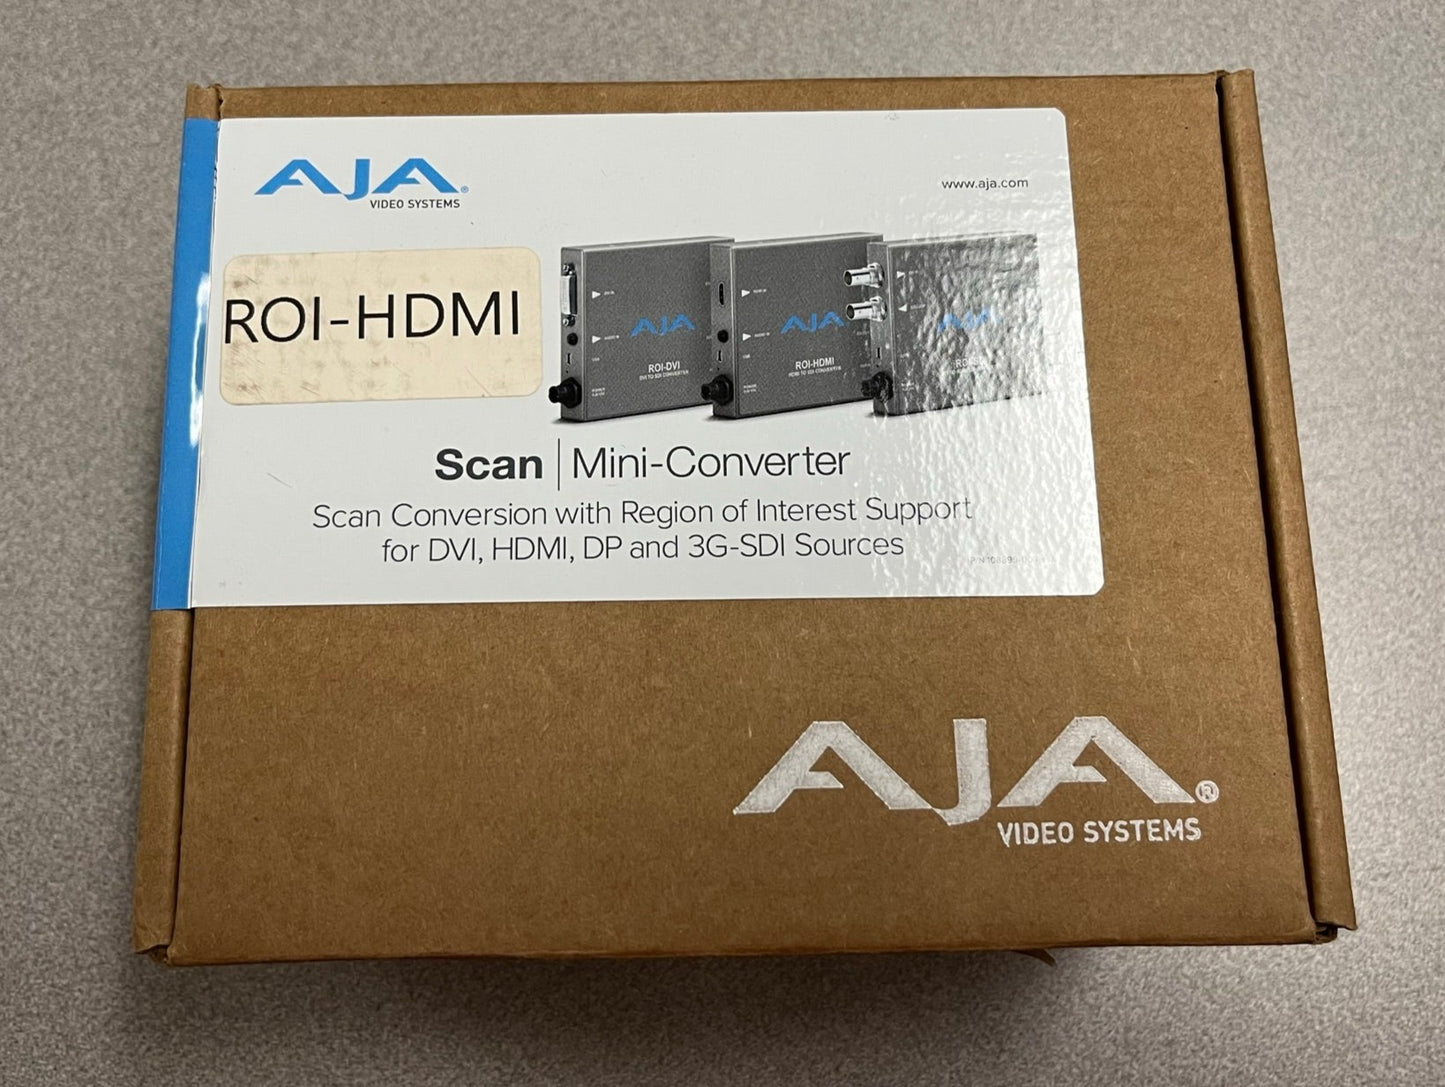 New AJA ROI HDMI to SDI Mini Converter for Sale We Sell Professional Audio Equipment. Audio Systems, Amplifiers, Consoles, Mixers, Electronics, Entertainment, Sound, Live.